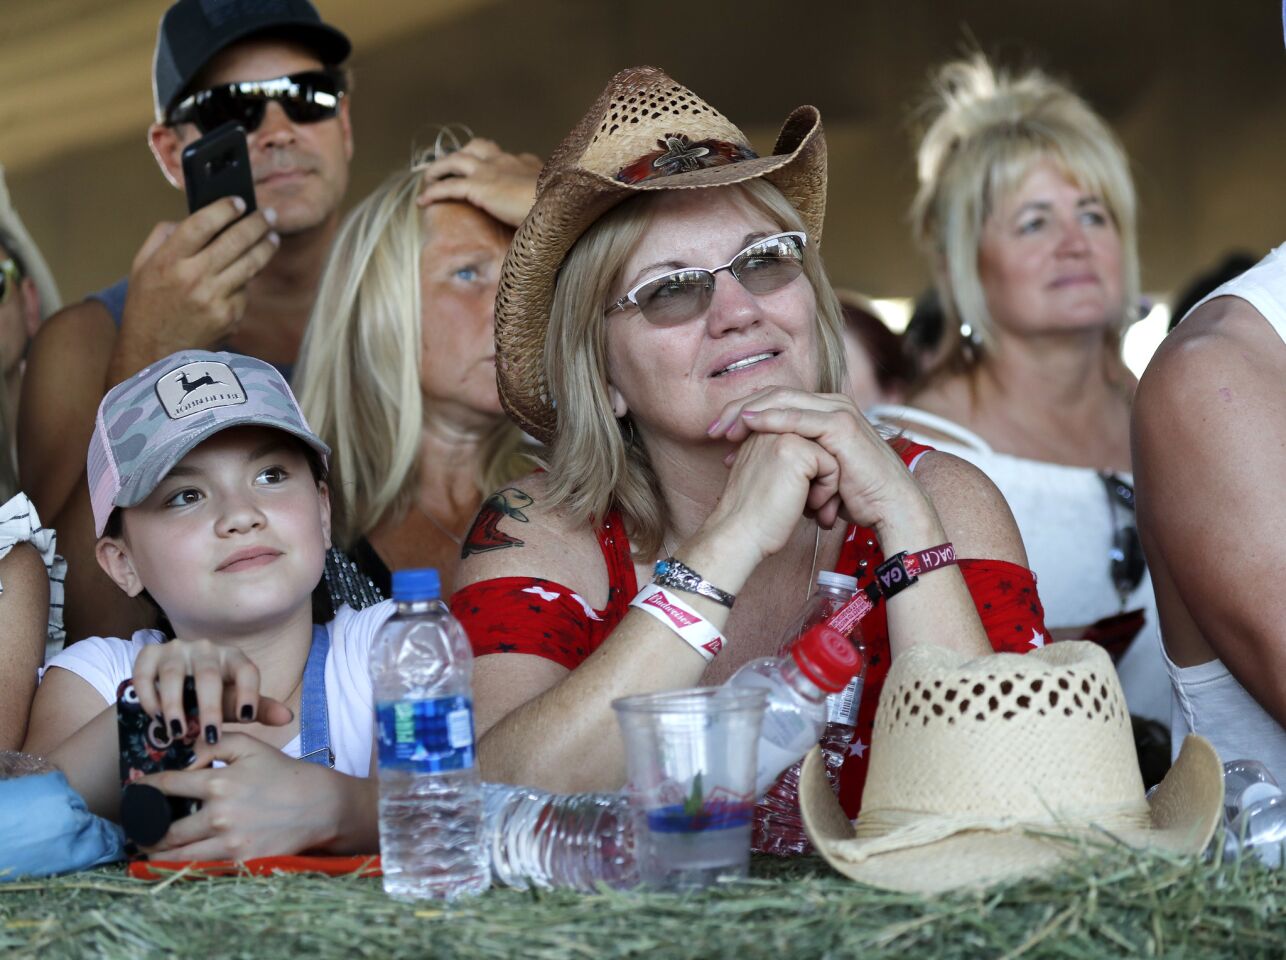 Fans on the front row lean on hay bales at Tanya Tucker's show.